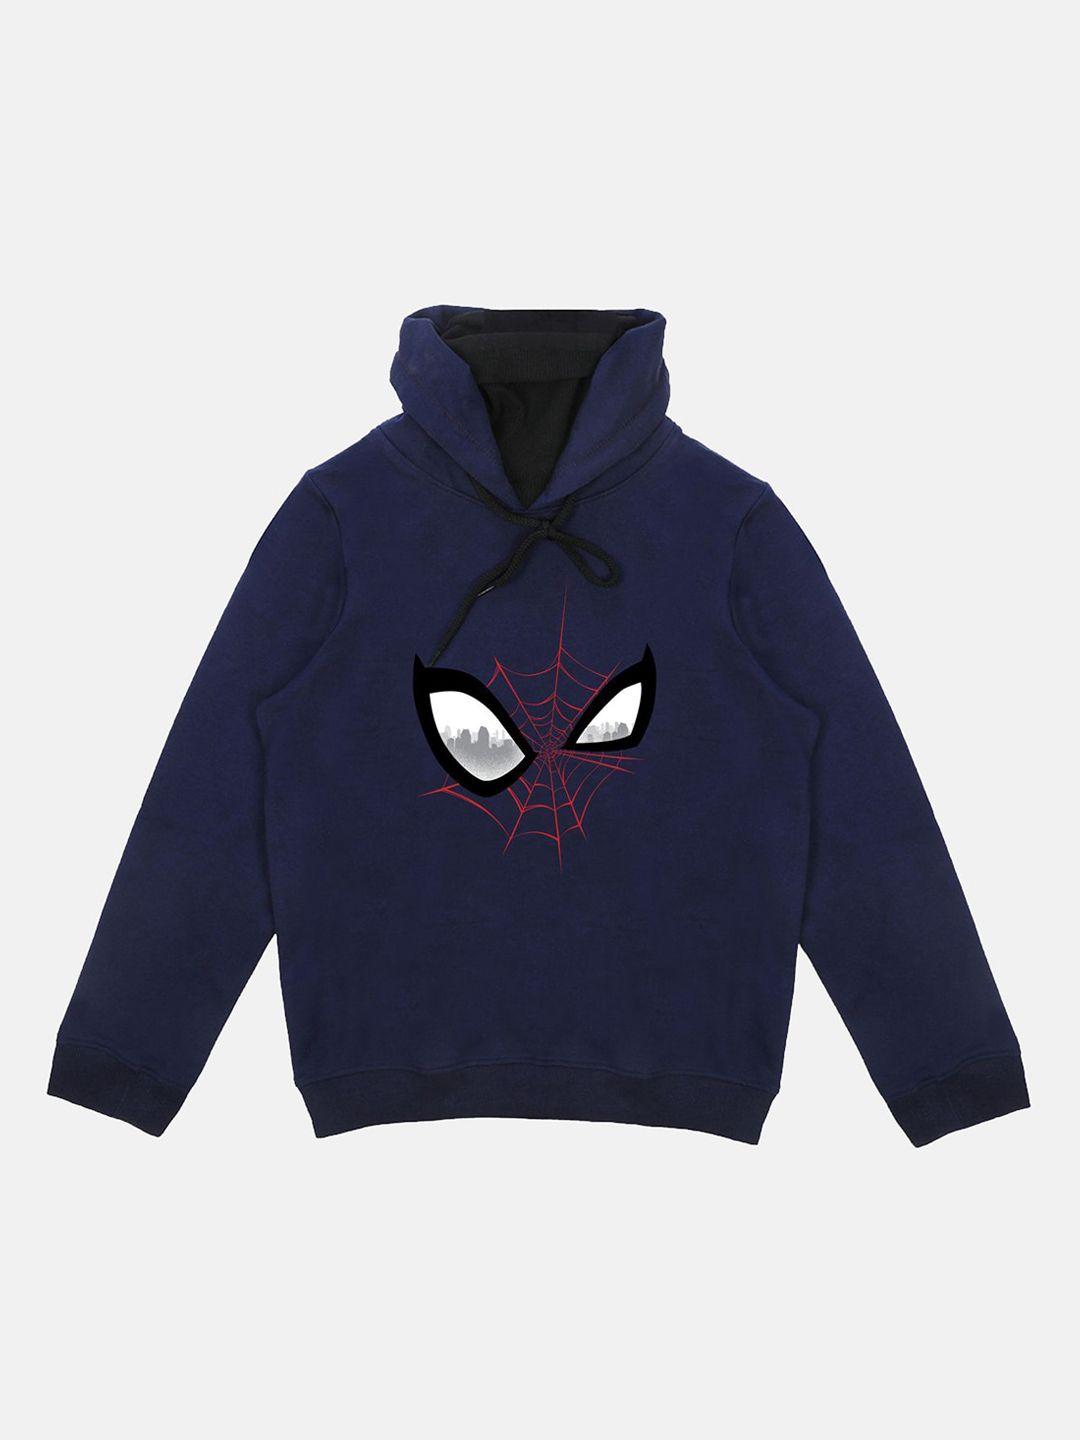 marvel by wear your mind boys navy blue & red spider-man printed hooded sweatshirt